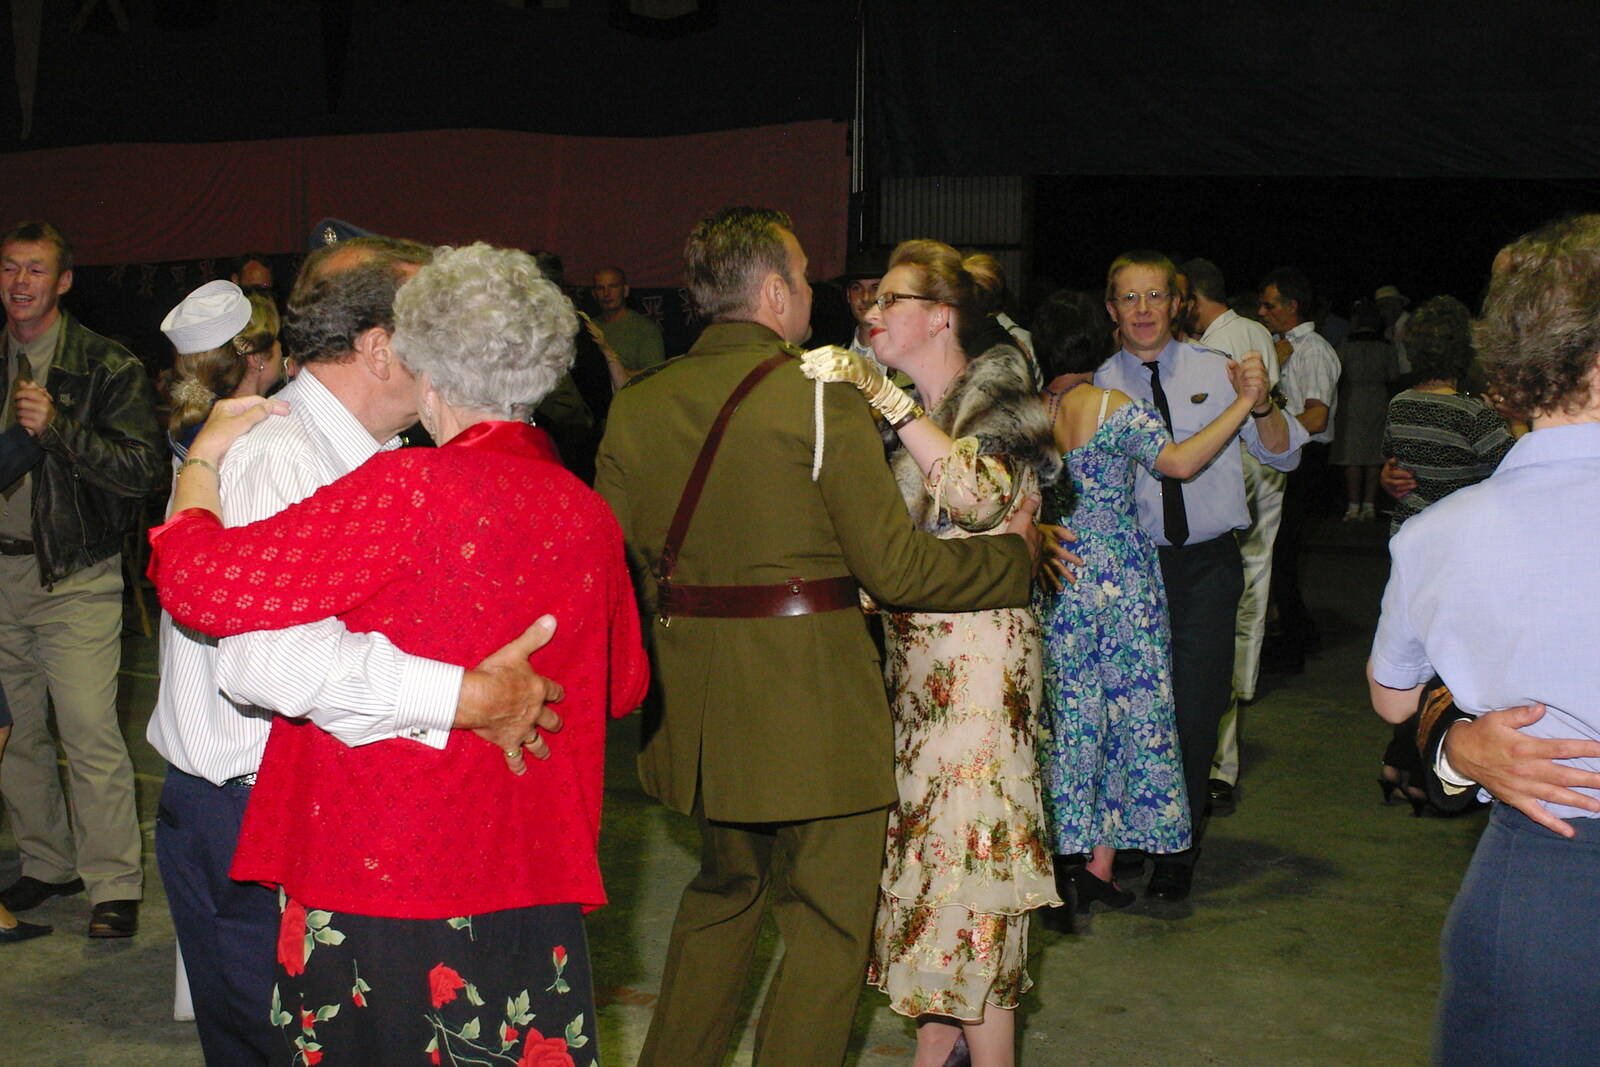 A slow dance from Another 1940s Dance, Ellough Airfield, Beccles, Suffolk - 24th June 2005